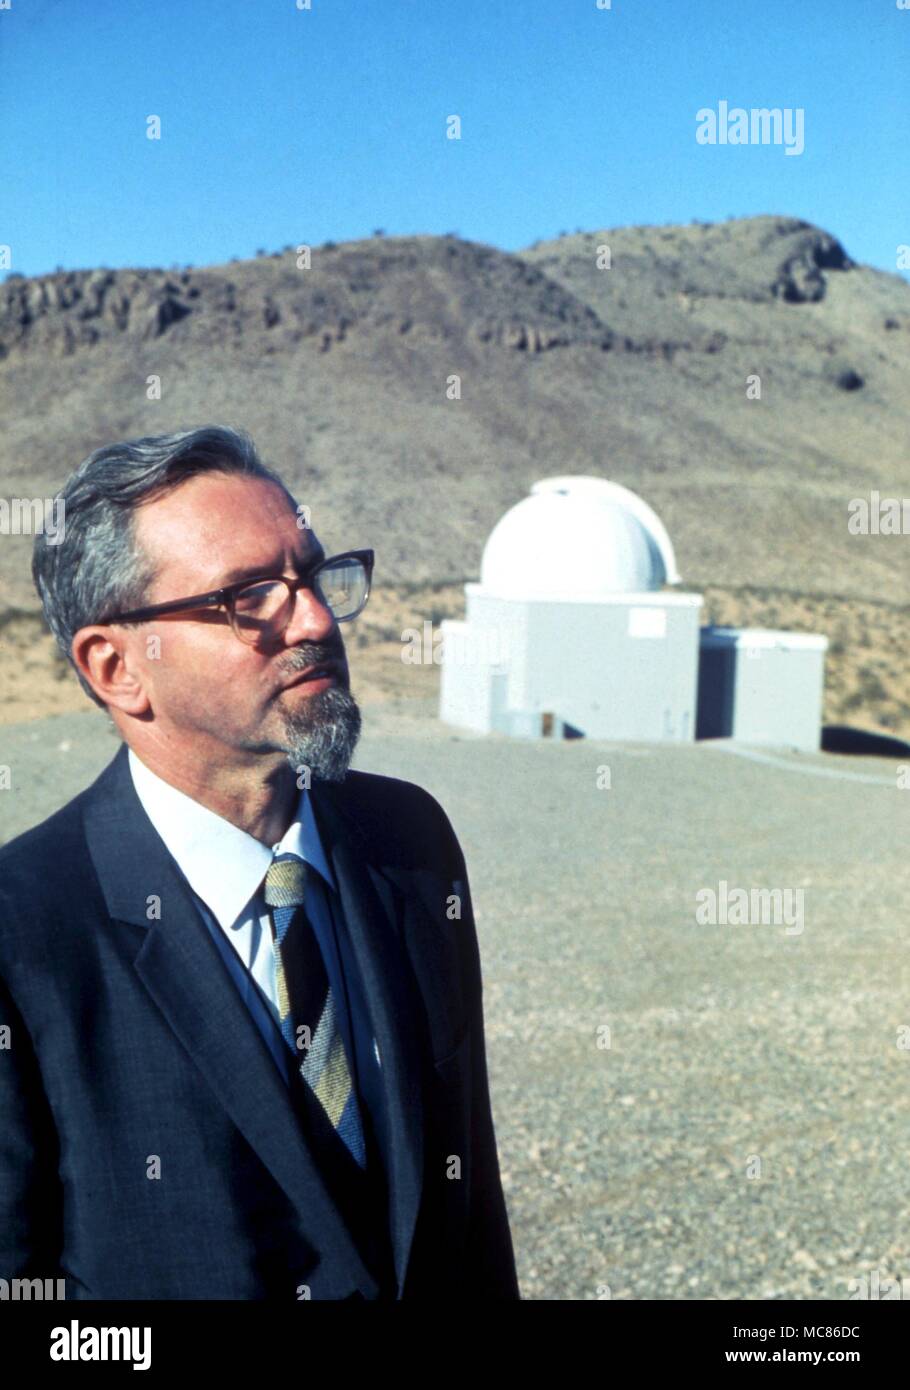 UFO - unidentified flying object Dr J Allen Hyneck, one time astronomer at Northwest University, USA, working officially on UFO reports for Project Blue Book. Founded Centre for UFO Studies, 1973 Stock Photo